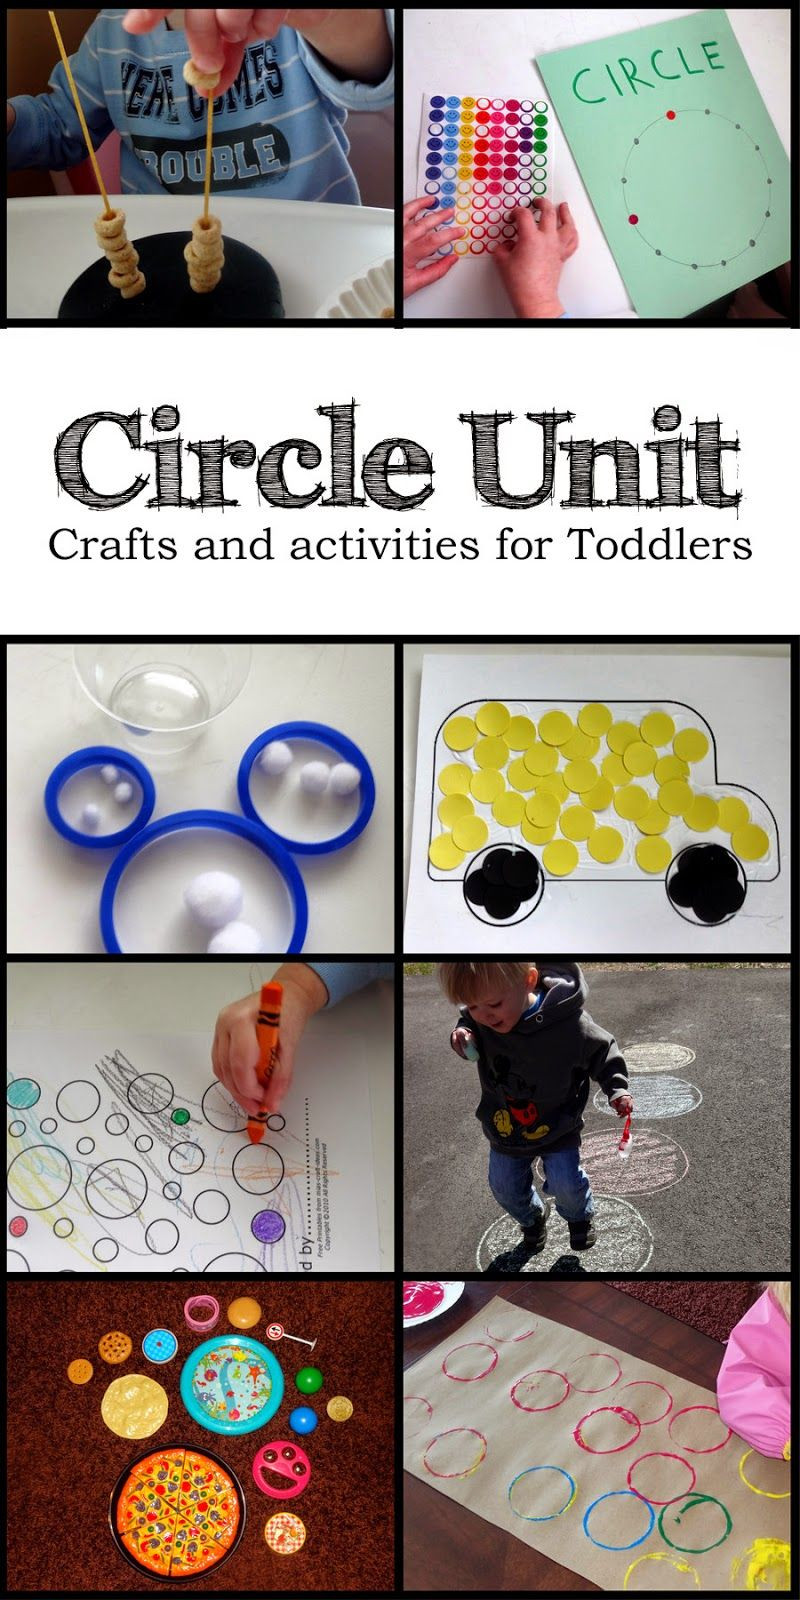 Learning Crafts For Preschoolers
 Circles Crafts and activities for toddlers learning